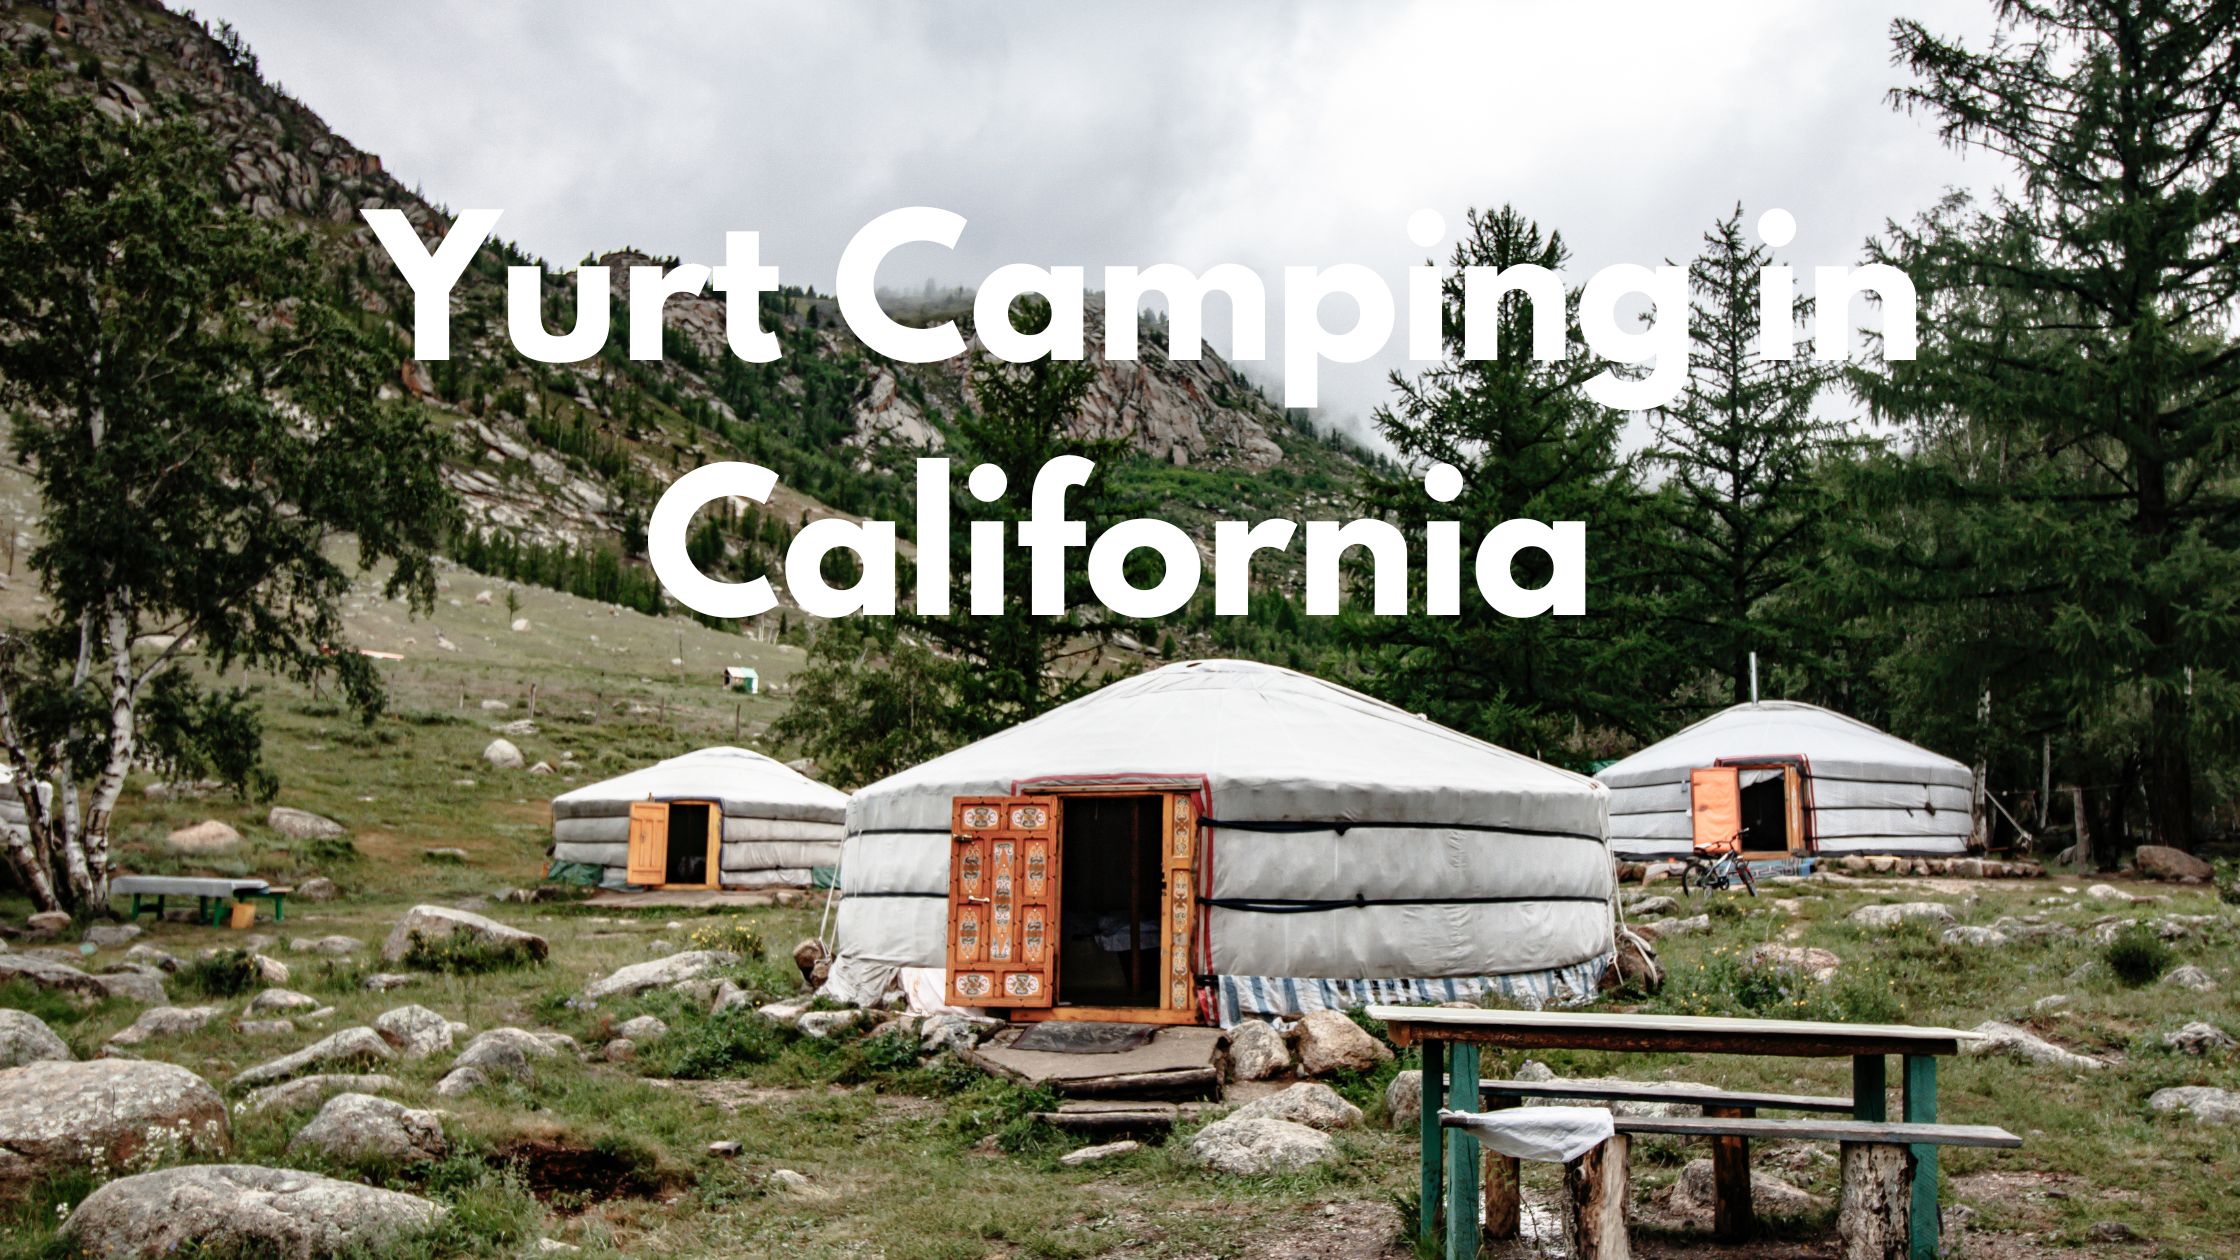 Experience the ultimate outdoor adventure with Yurt Camping in California